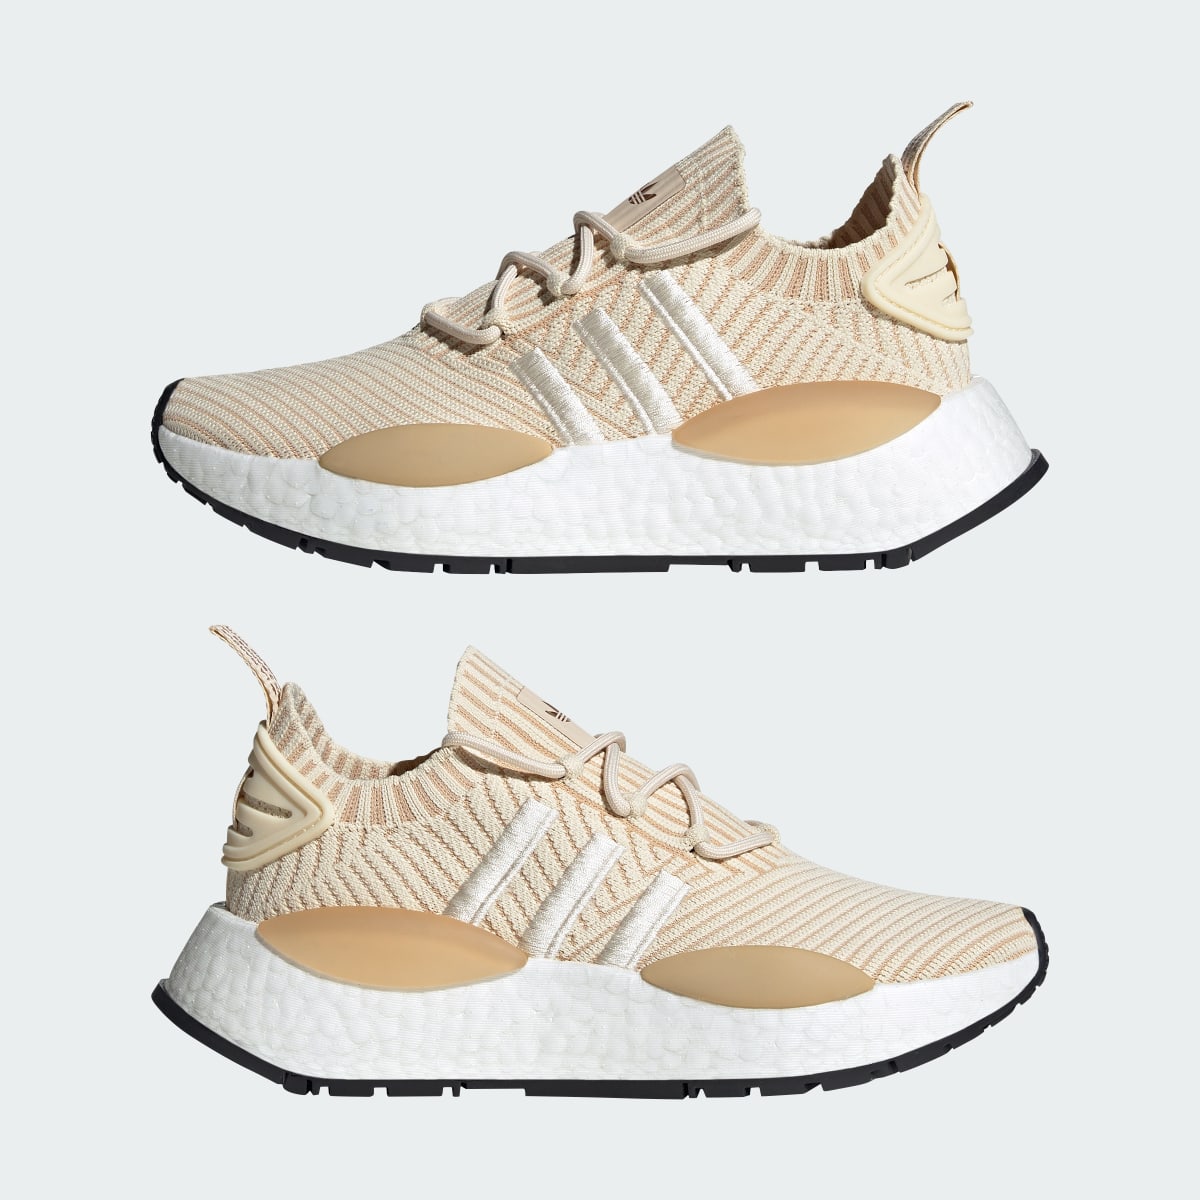 Adidas NMD_W1 Shoes. 8